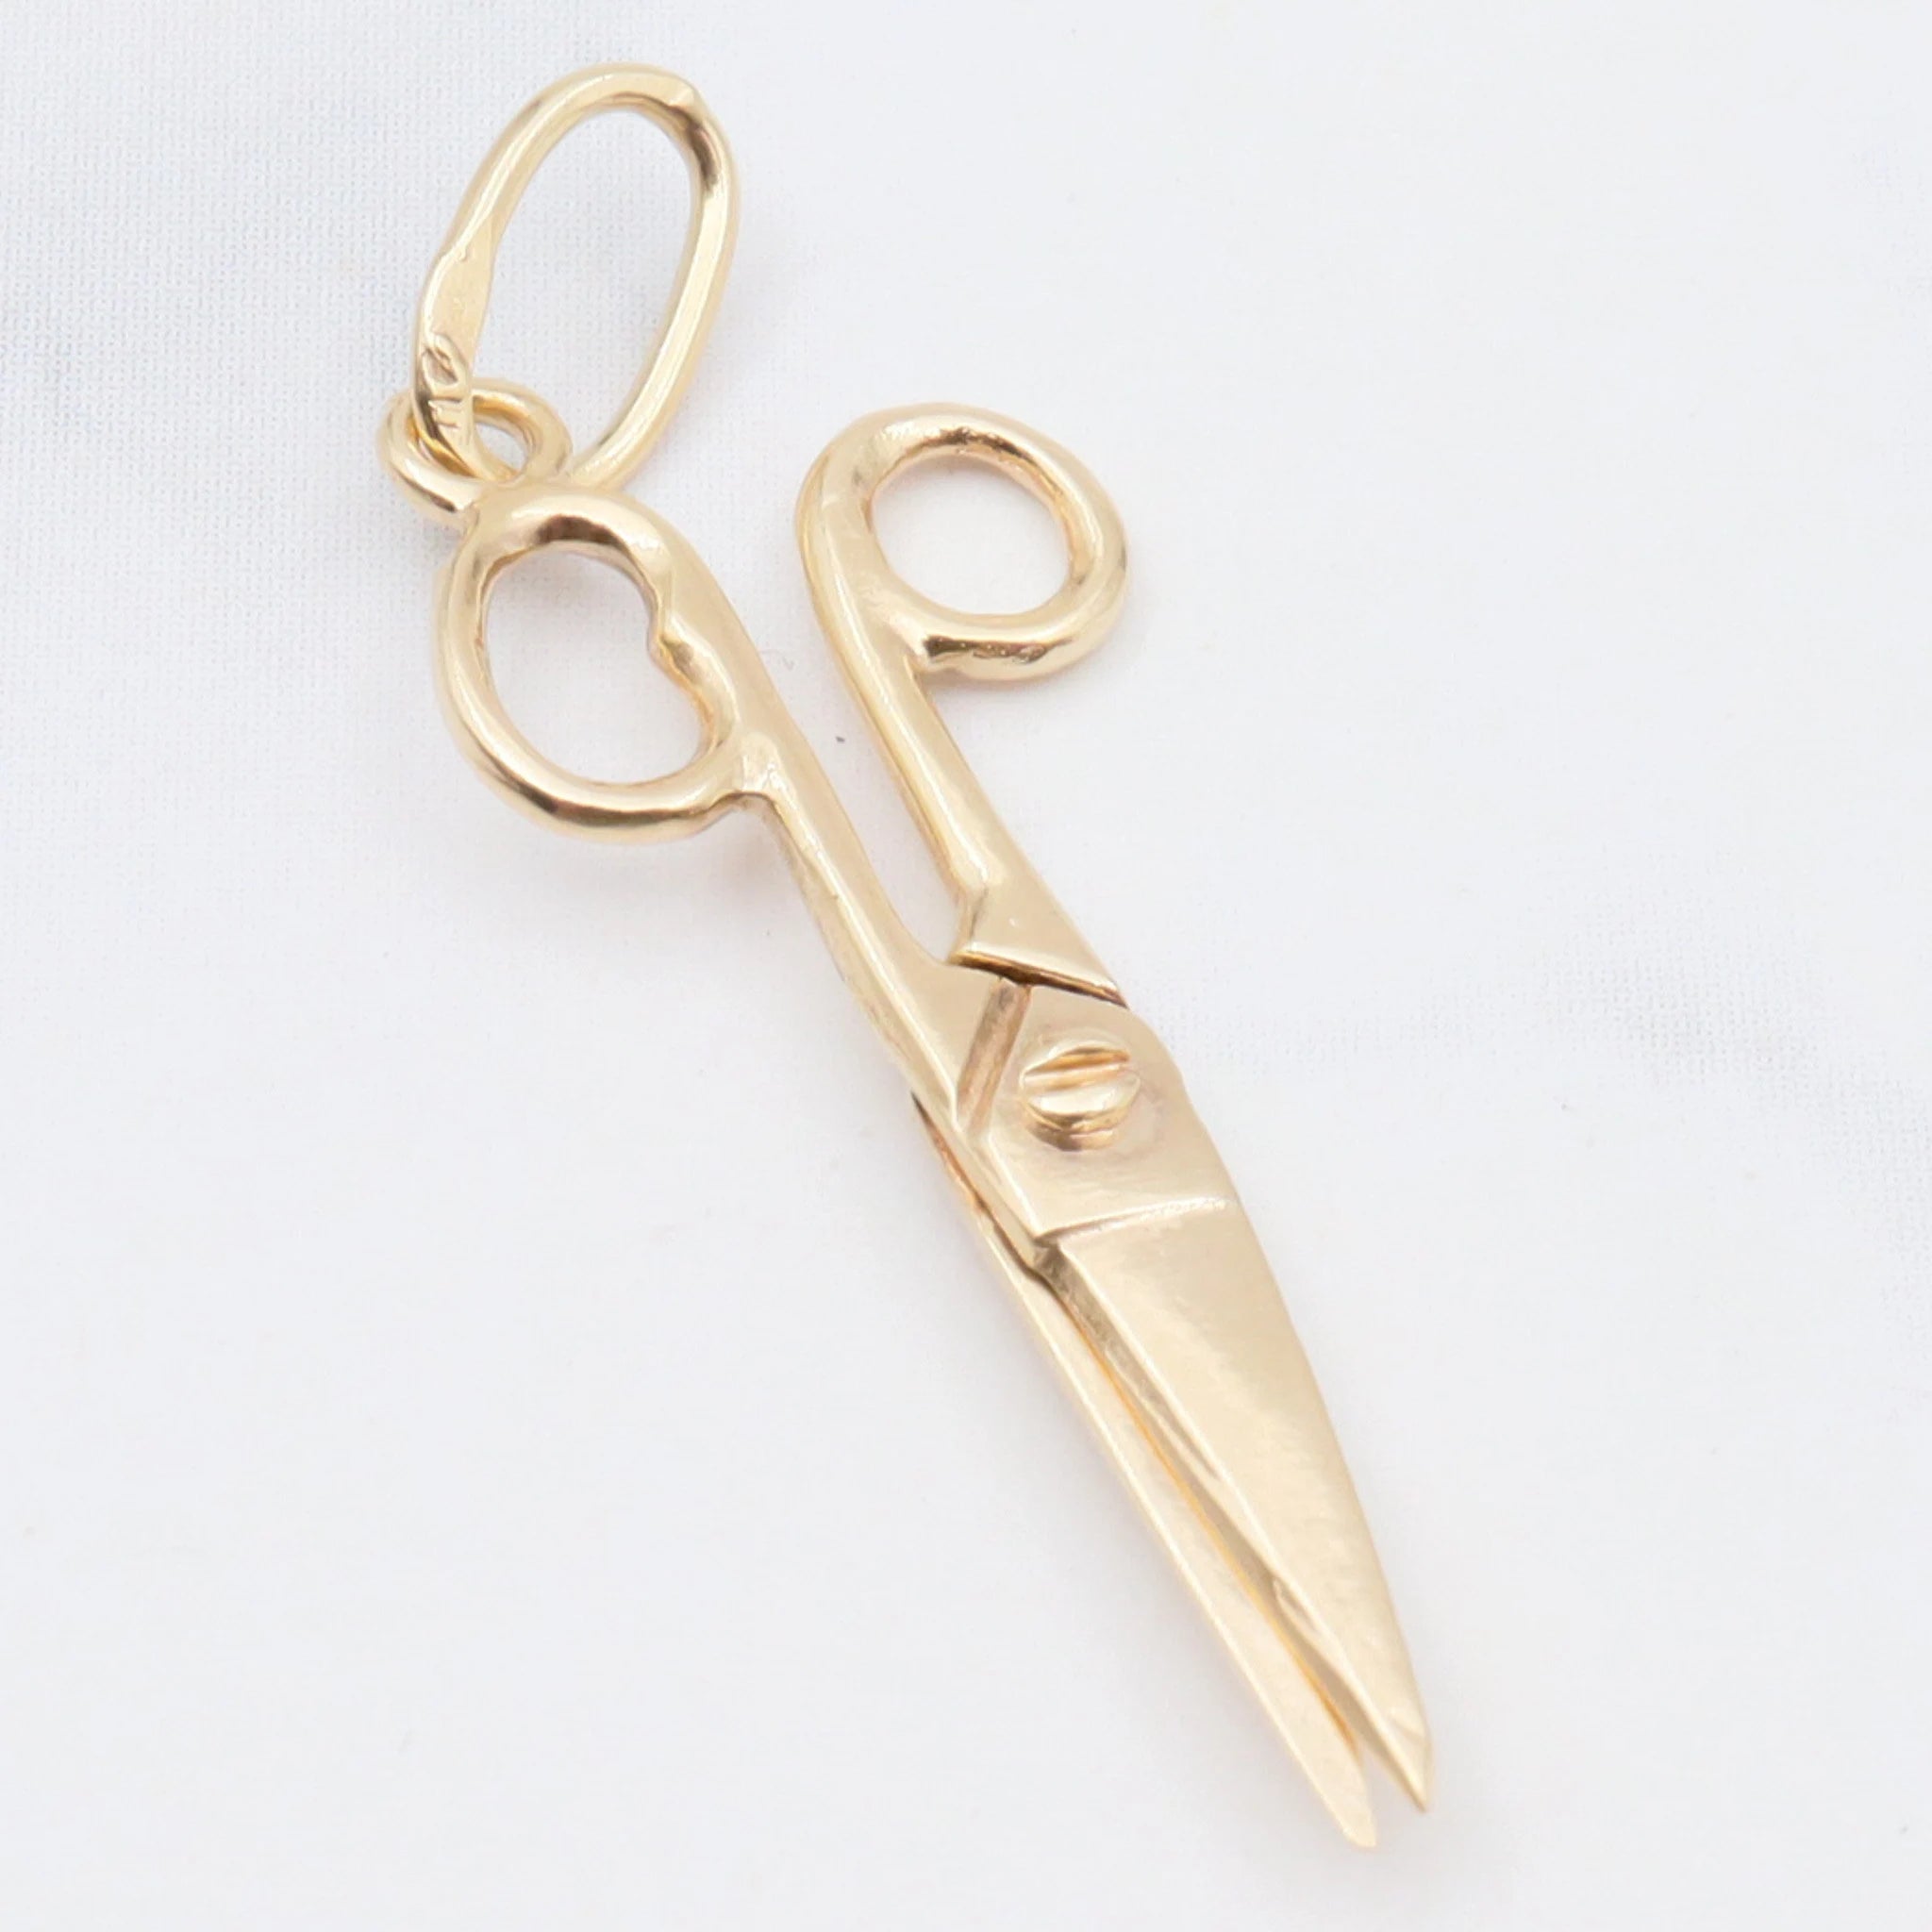 Vintage moving 14k gold sewing scissors charm